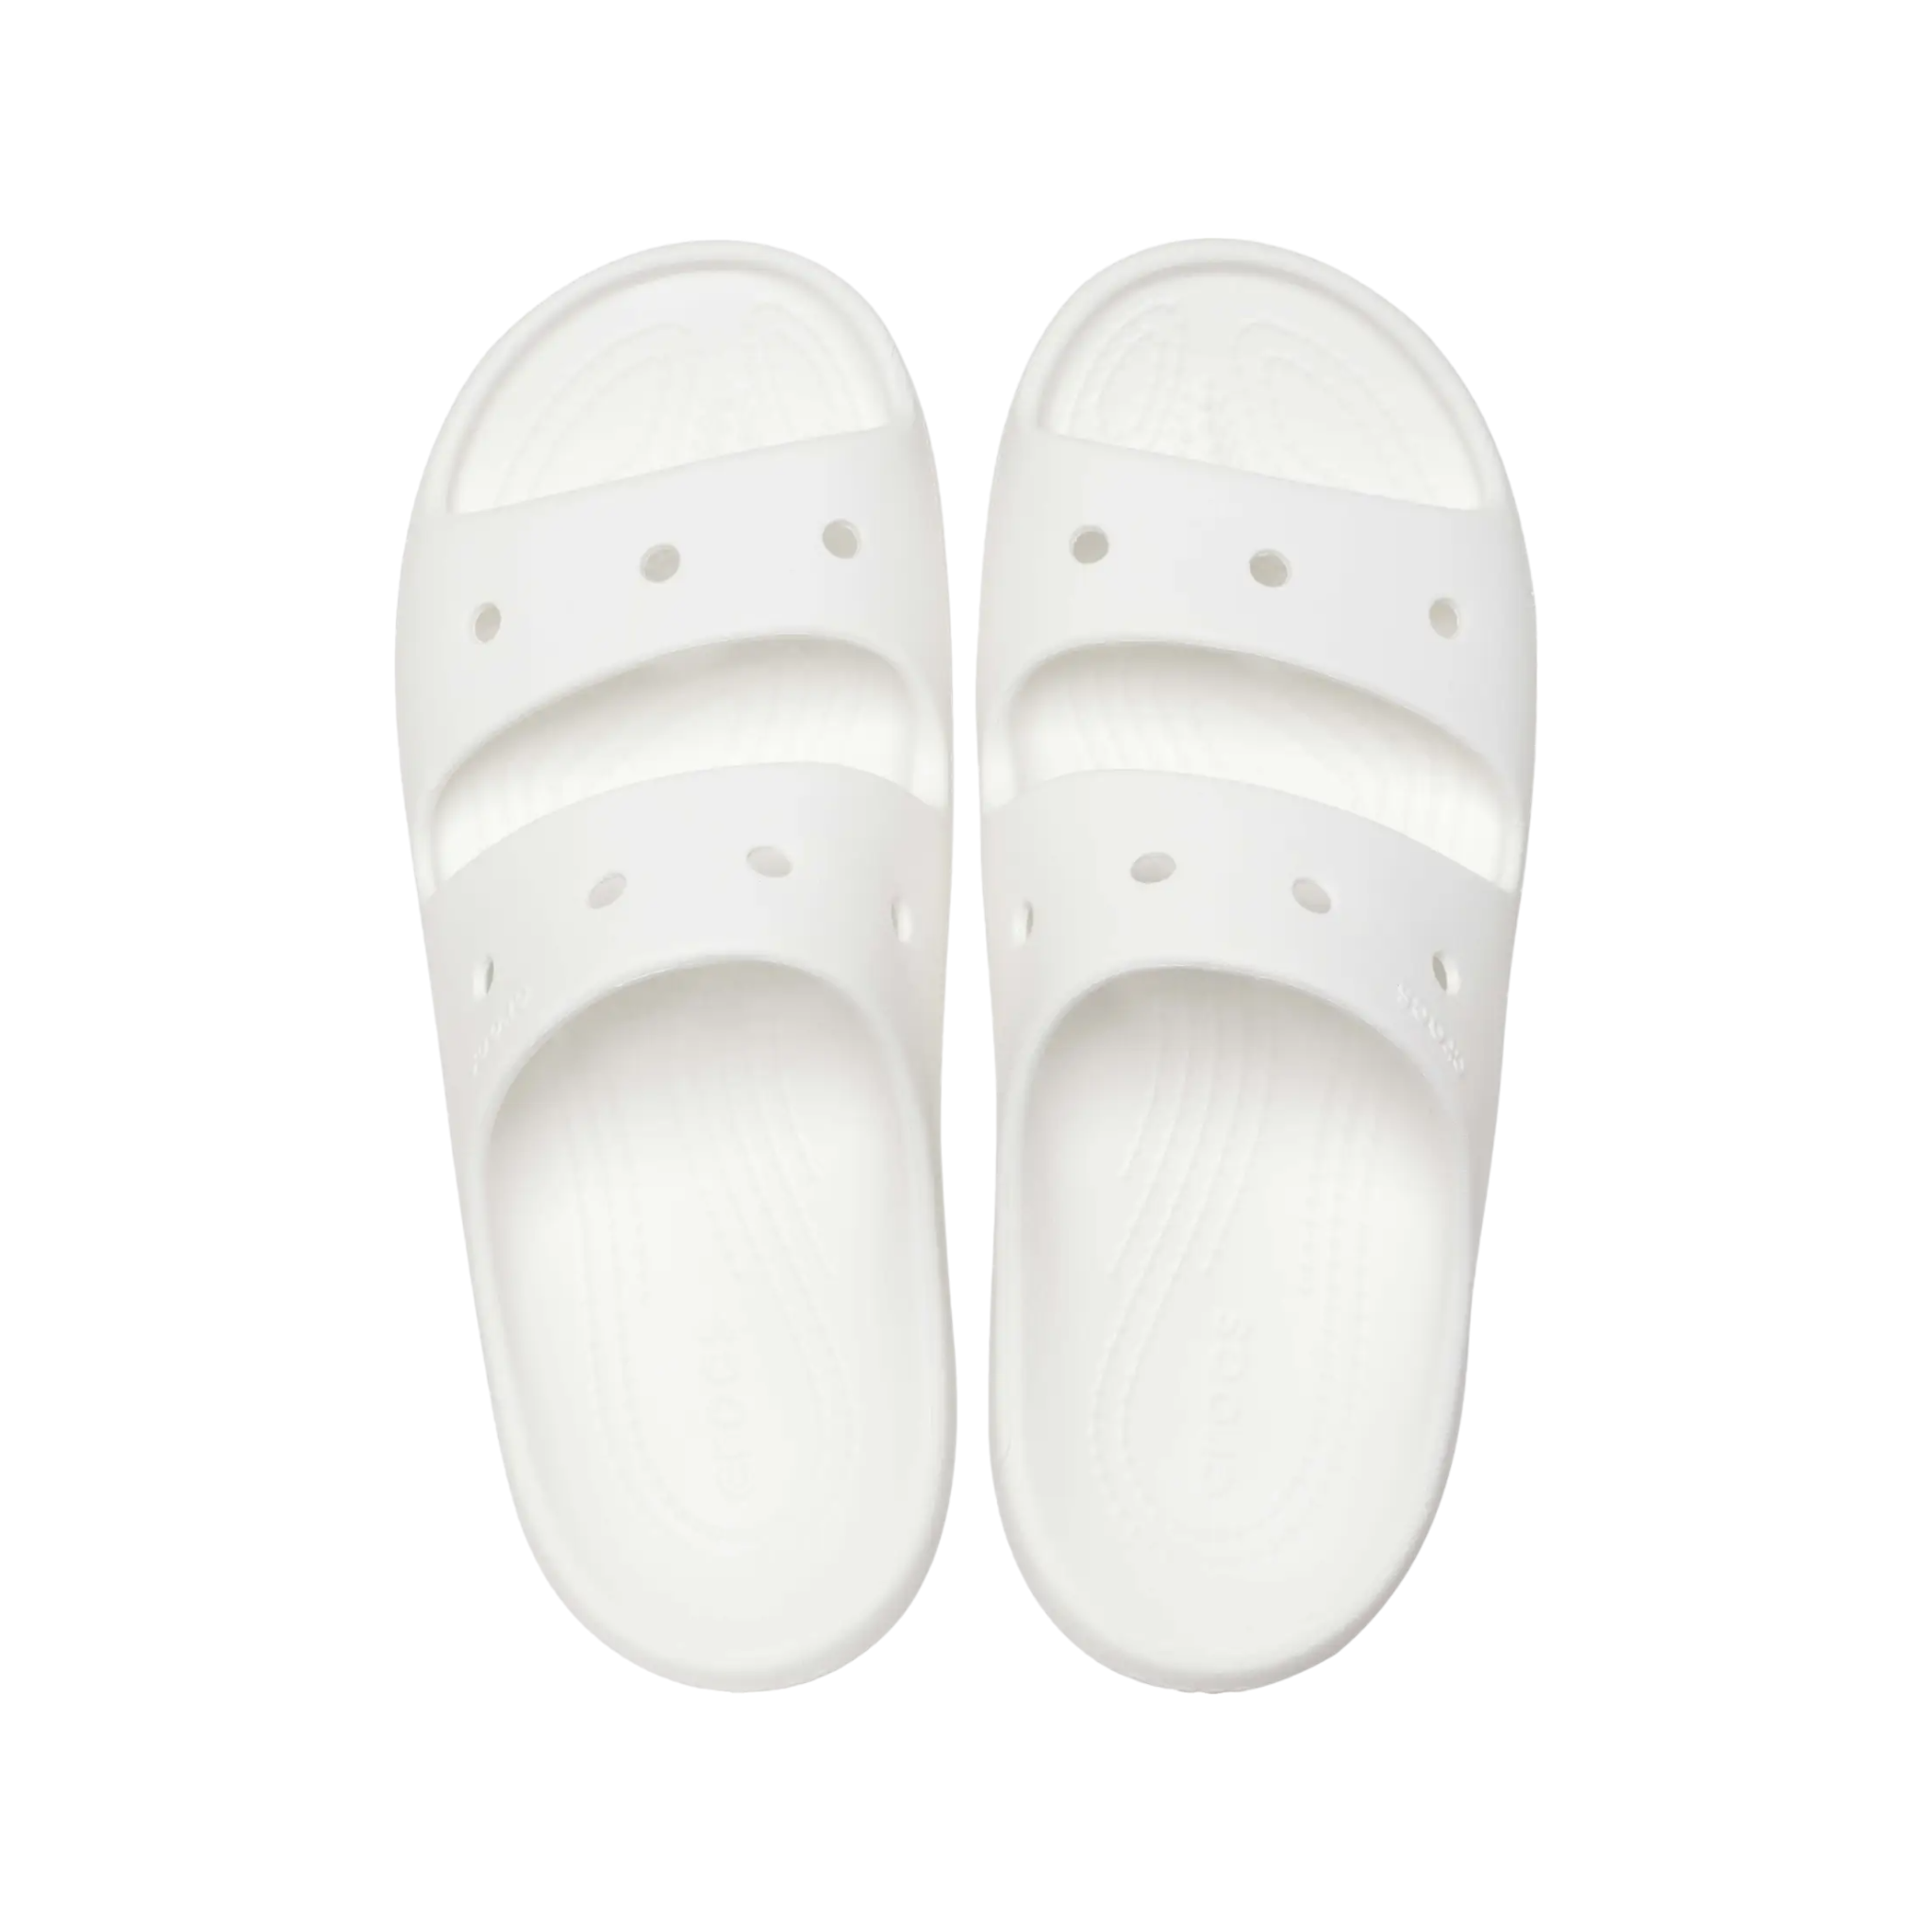 Shop Classic Sandal V2 - with shoe&me - from Crocs - Sandals - Mens, Sandals, Summer, Womens - [collection]